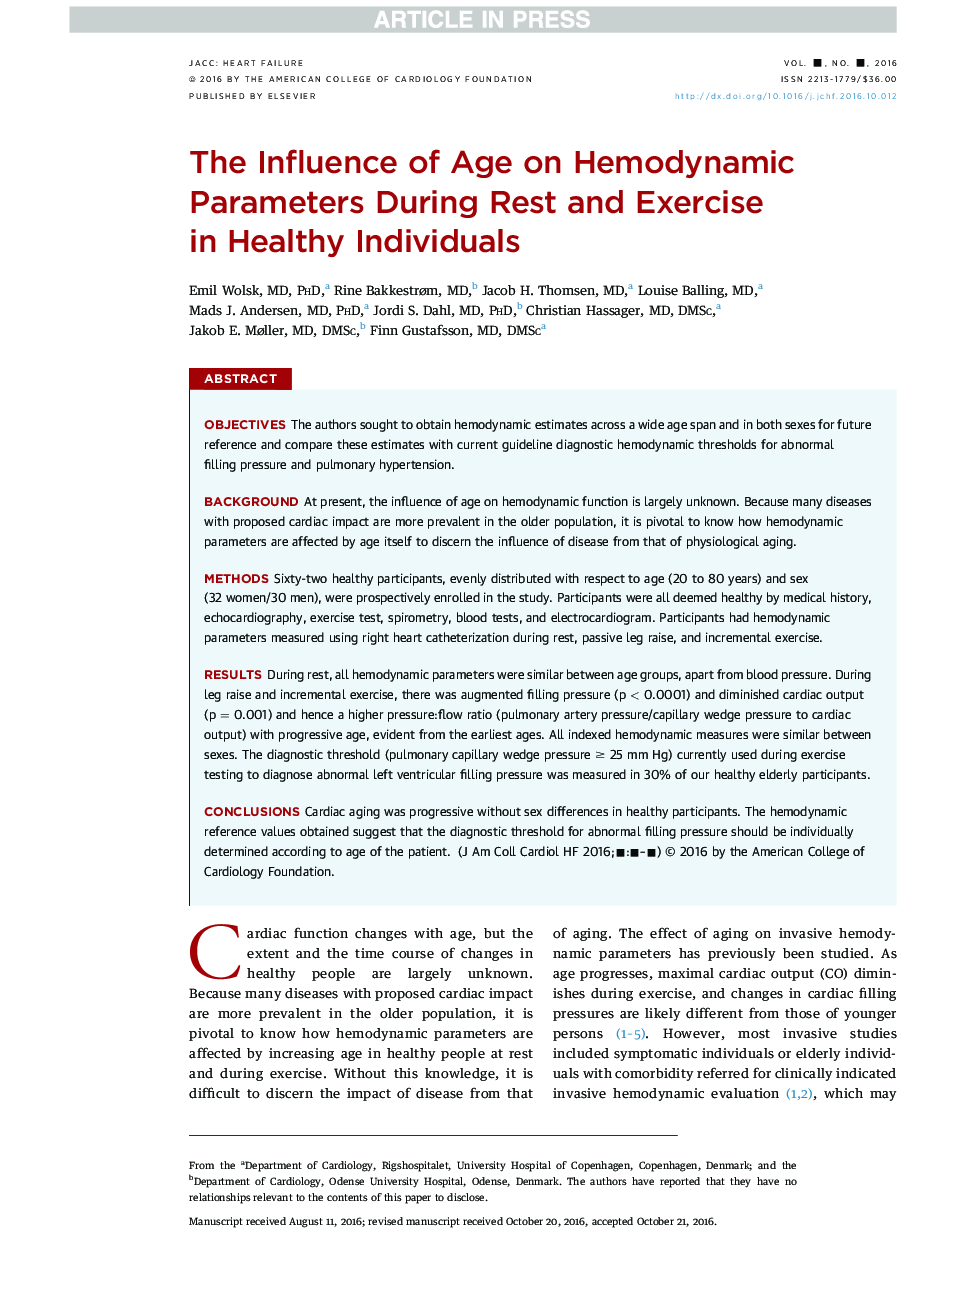 The Influence of Age on Hemodynamic Parameters During Rest andÂ Exercise inÂ Healthy Individuals